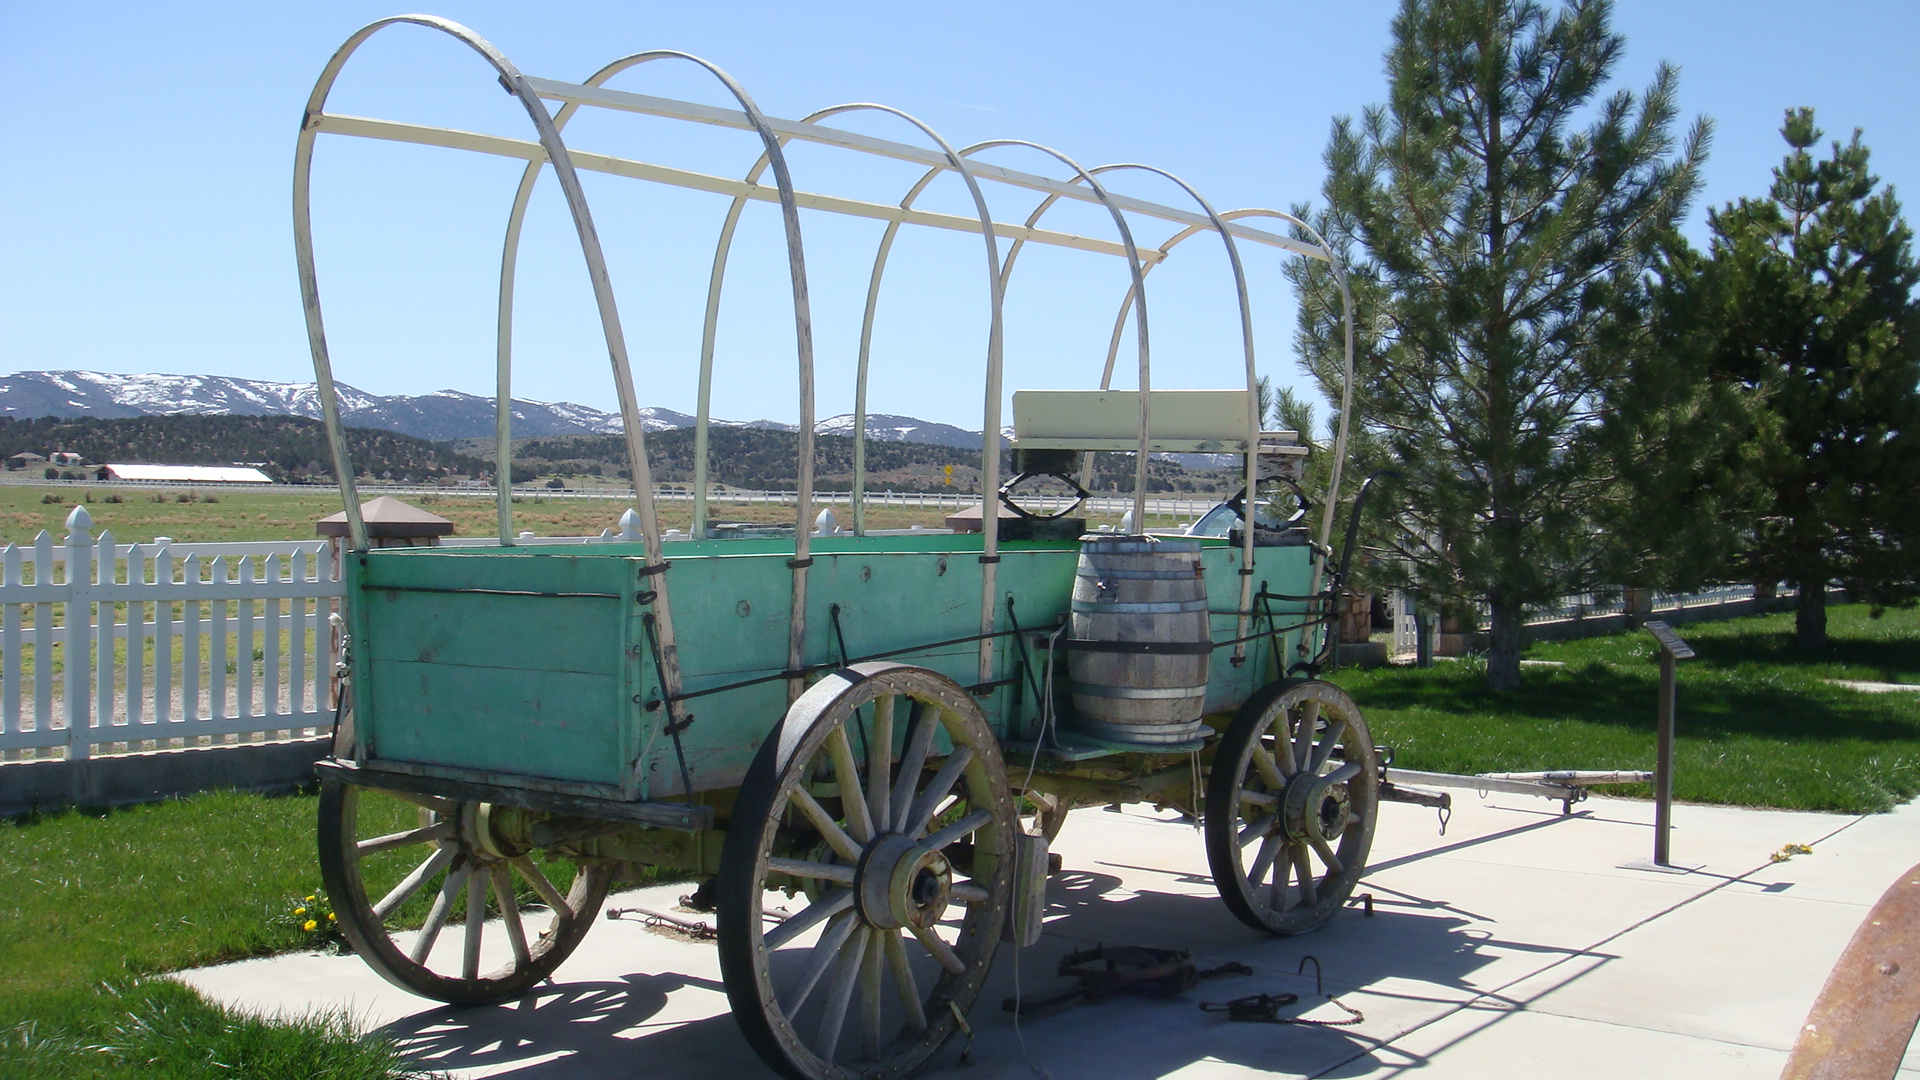 A wagon on display at the Terry Family Heritage Park